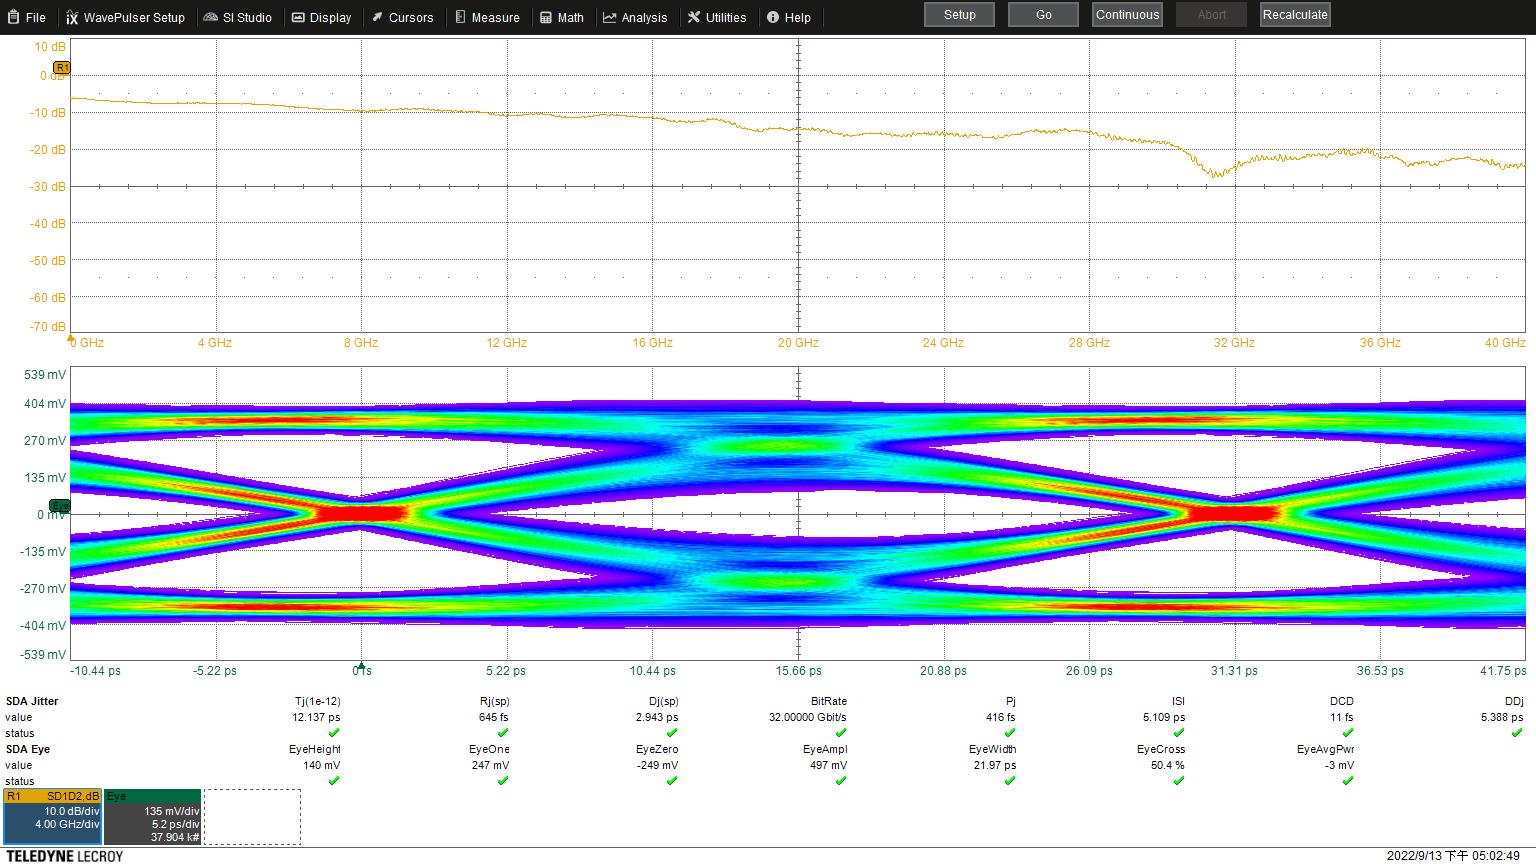 Performance at 32 Gbps (Loopback Path)